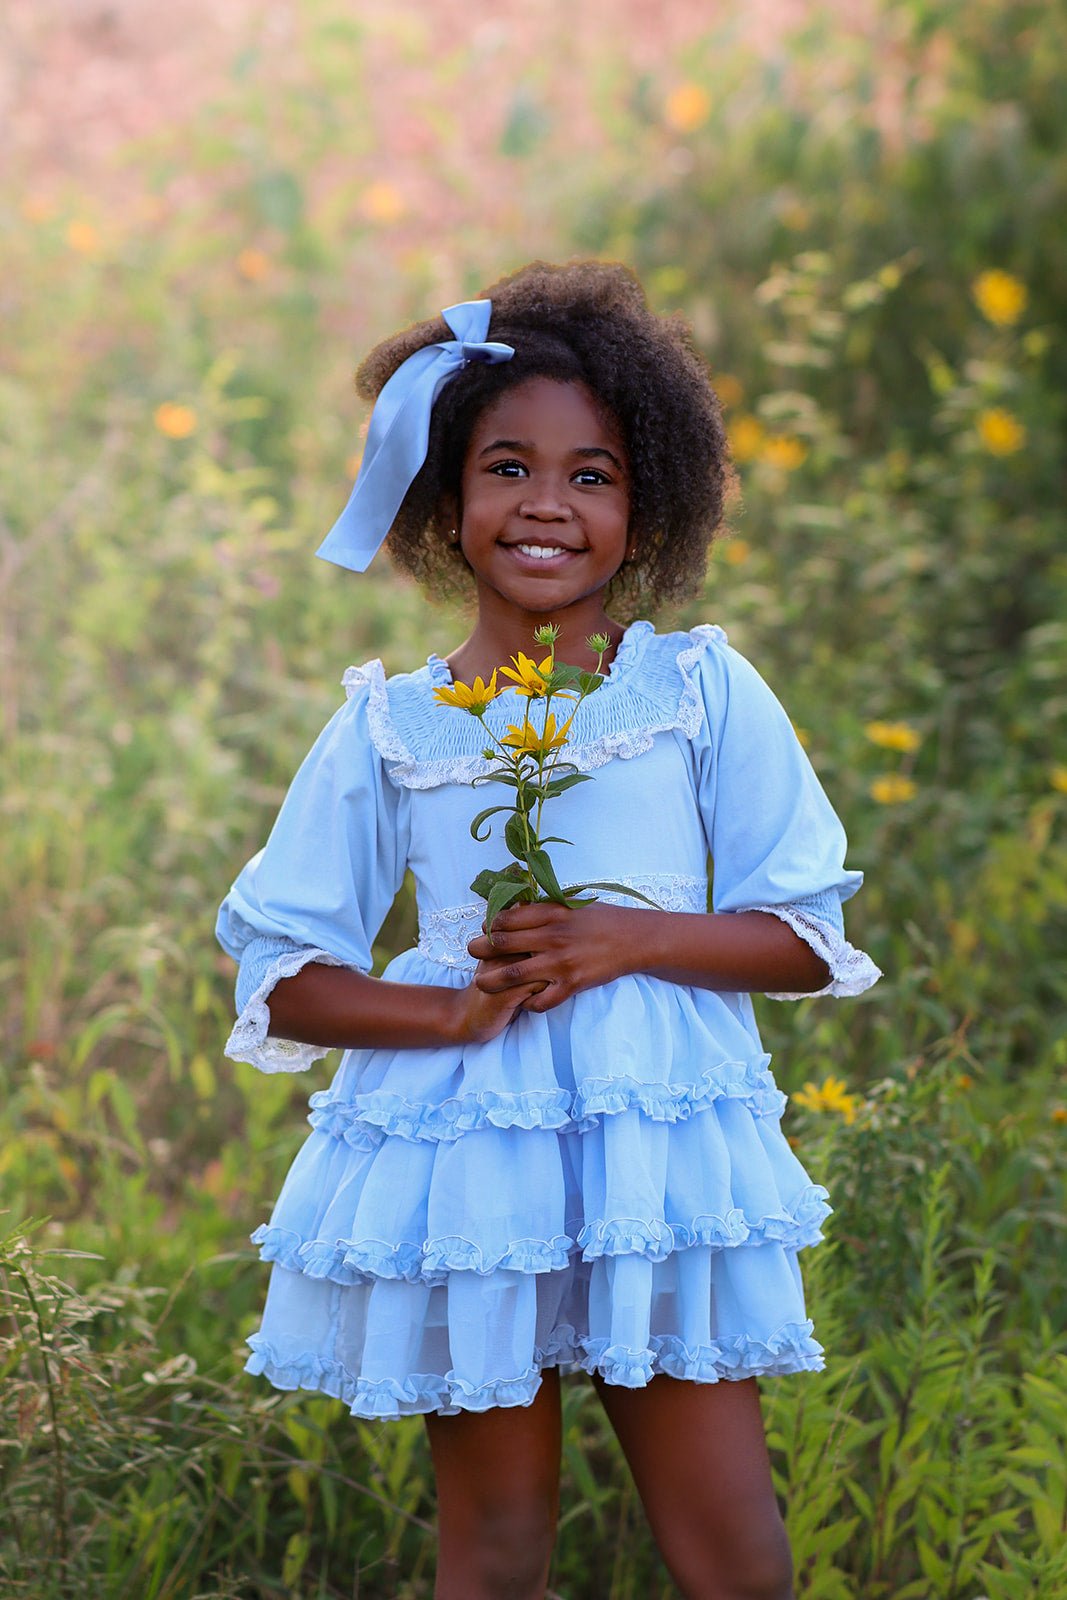 Out of the Sea Pale Blue Ruffled Layers, Smocked Top Dreamer Dress - Evie's Closet Clothing